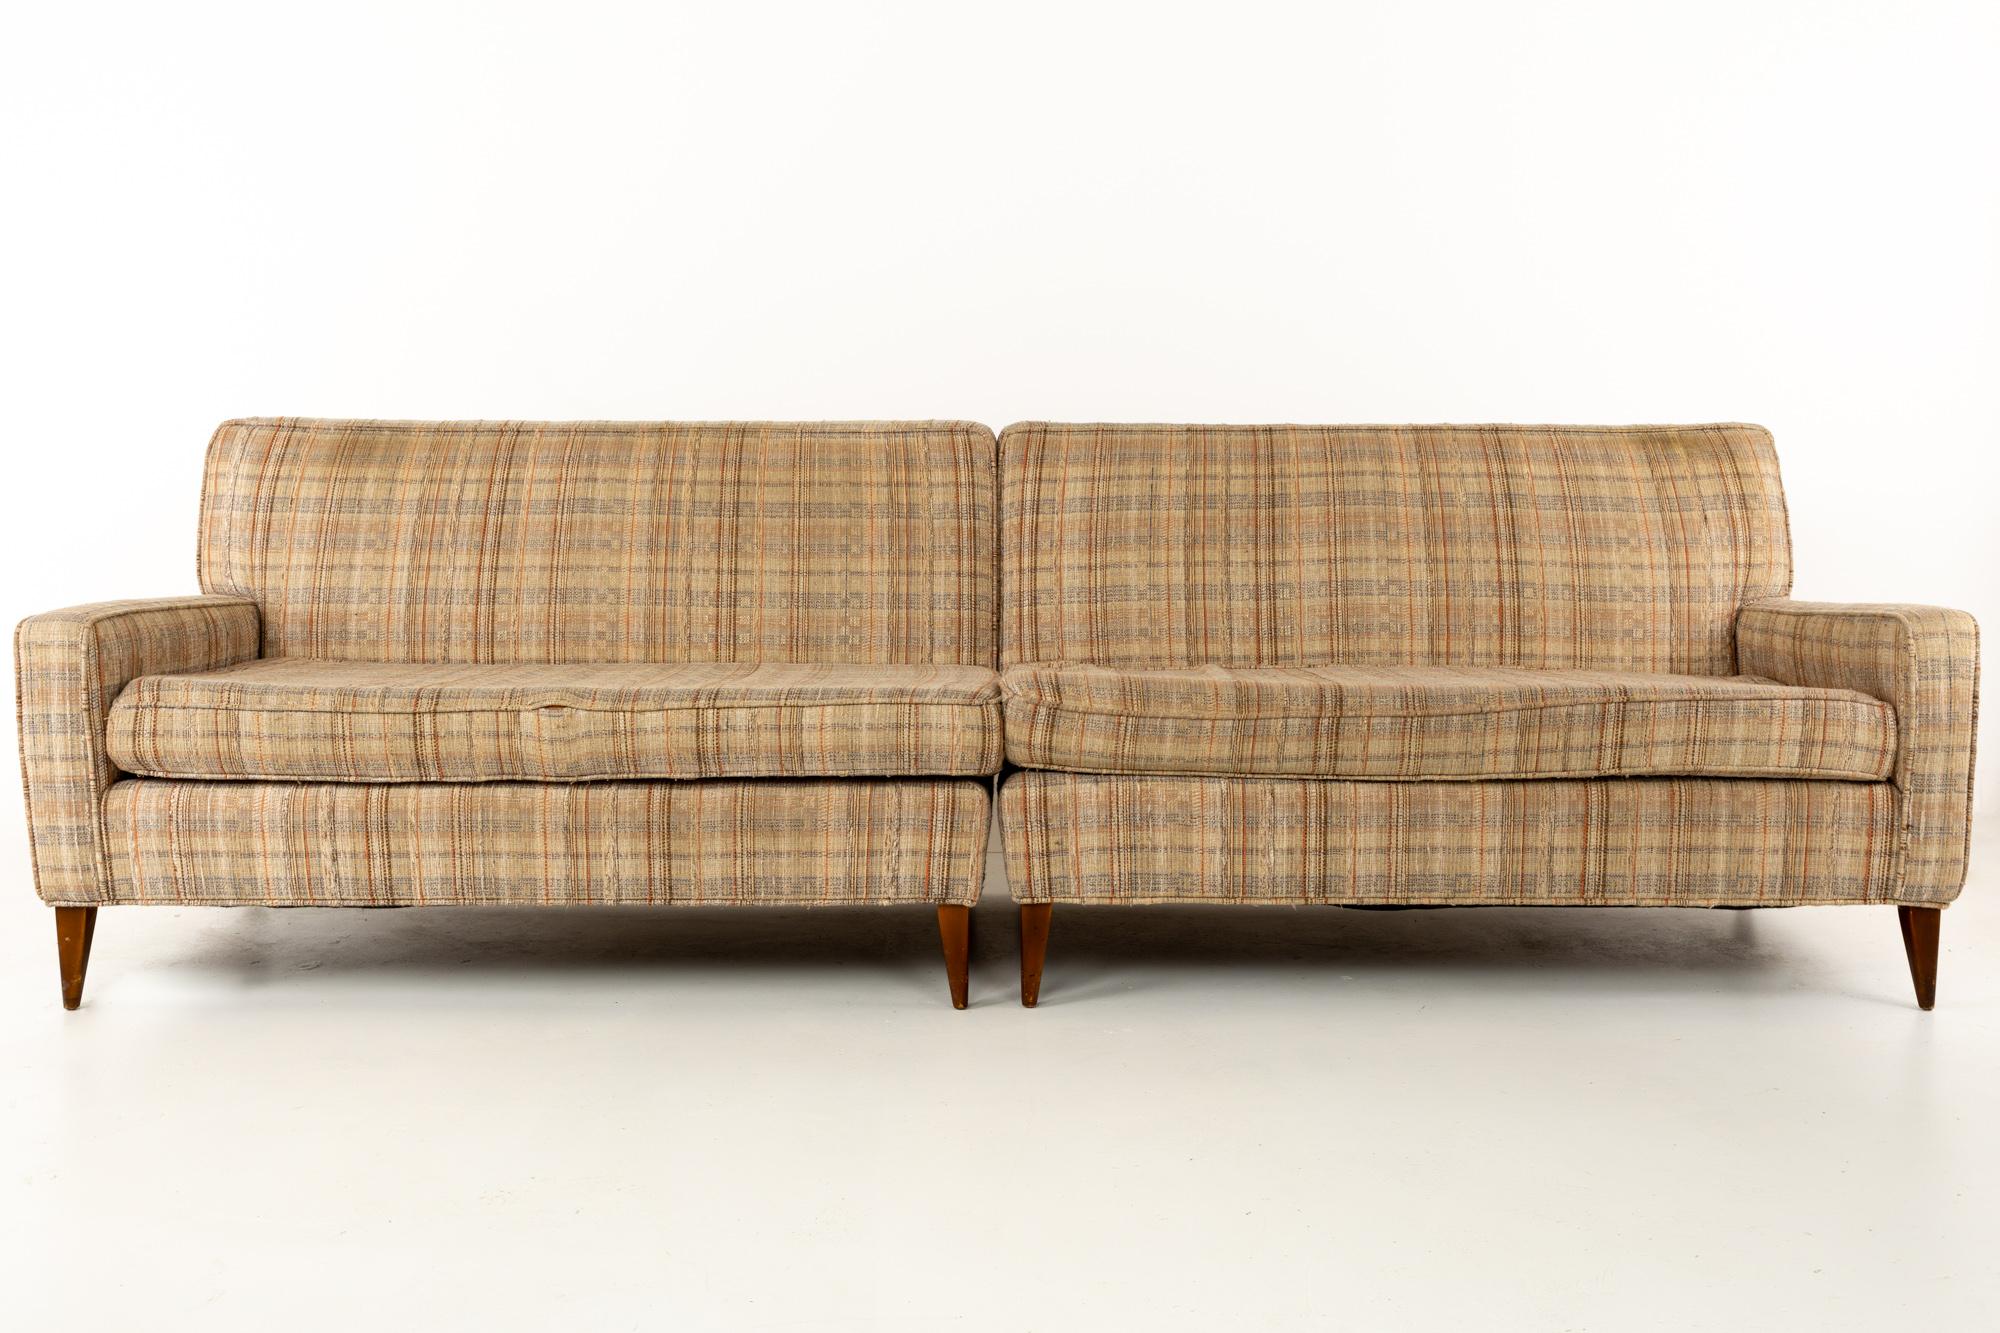 Paul McCobb for Planner Group Mid Century 2-piece 4-seat sectional sofa

Each piece is 51 wide x 32 deep x 31 inches high, and a total combined width of 102; the seat height is 17.5 and the arm height is 20.5 inches

All pieces of furniture can be